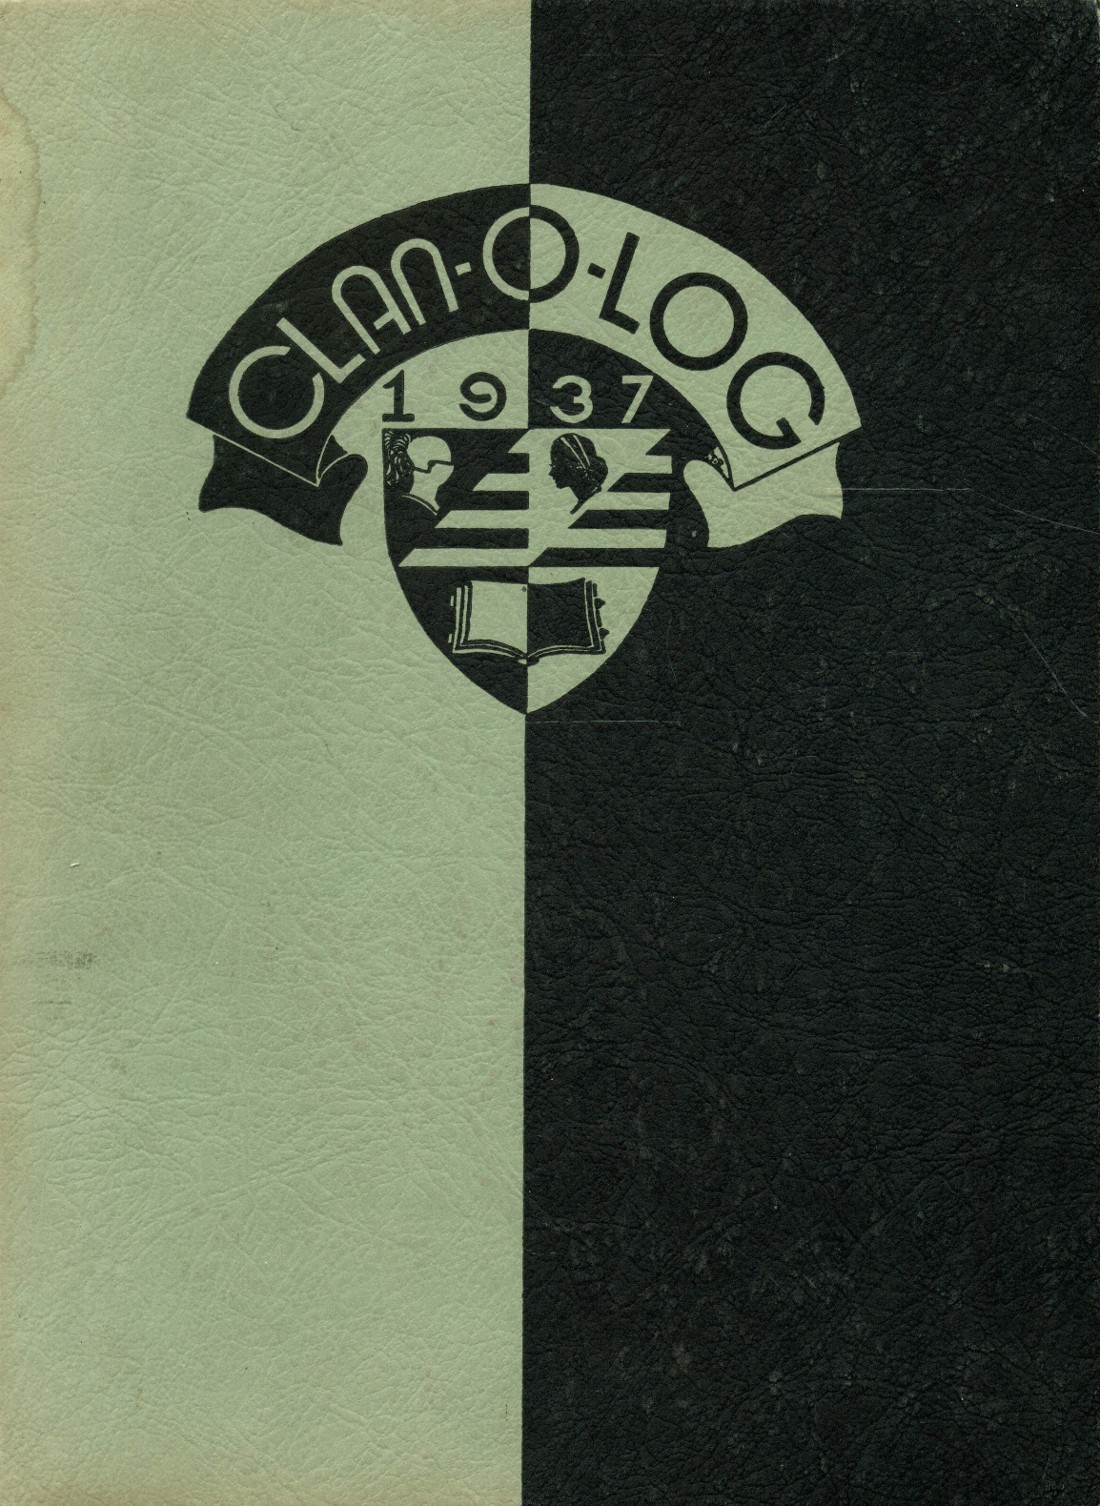 1937 yearbook from Piedmont High School from Piedmont, California for sale